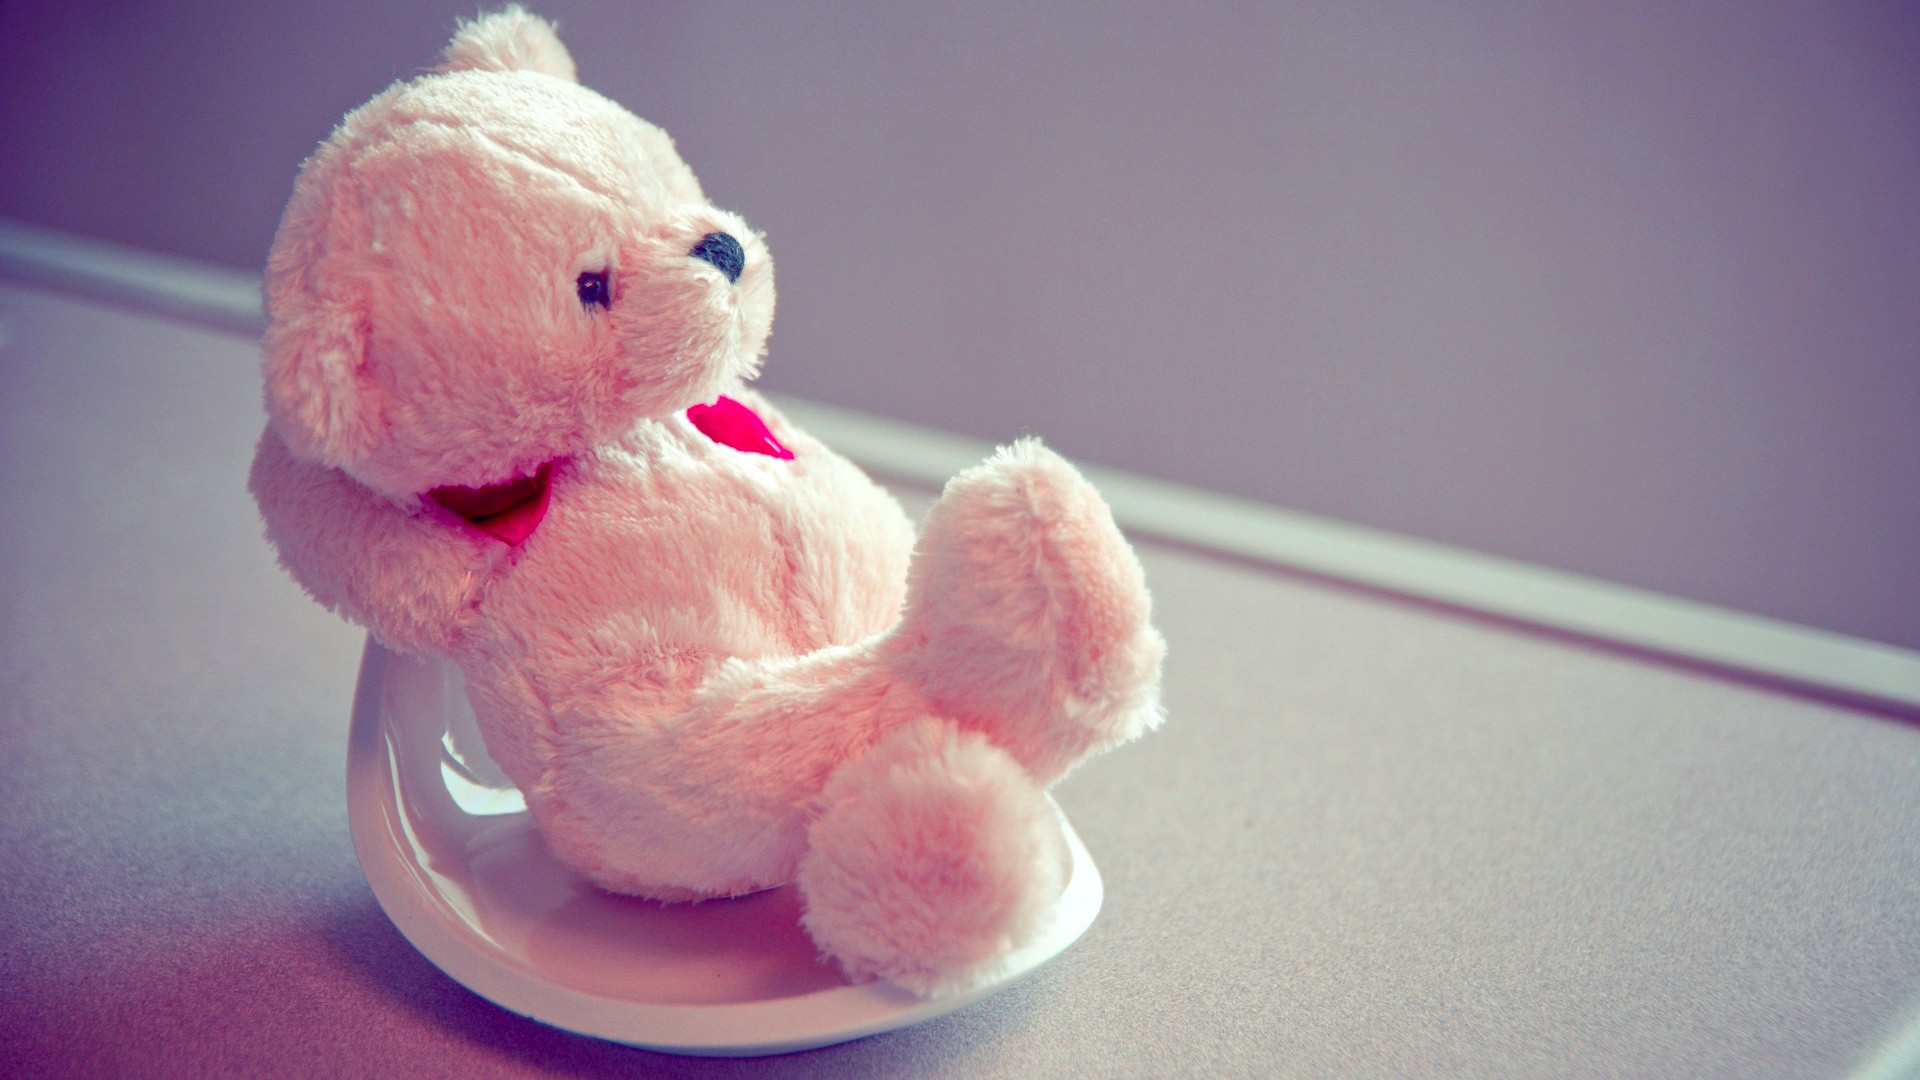  Pink  Teddy Bear  HD Love 4k Wallpapers  Images 